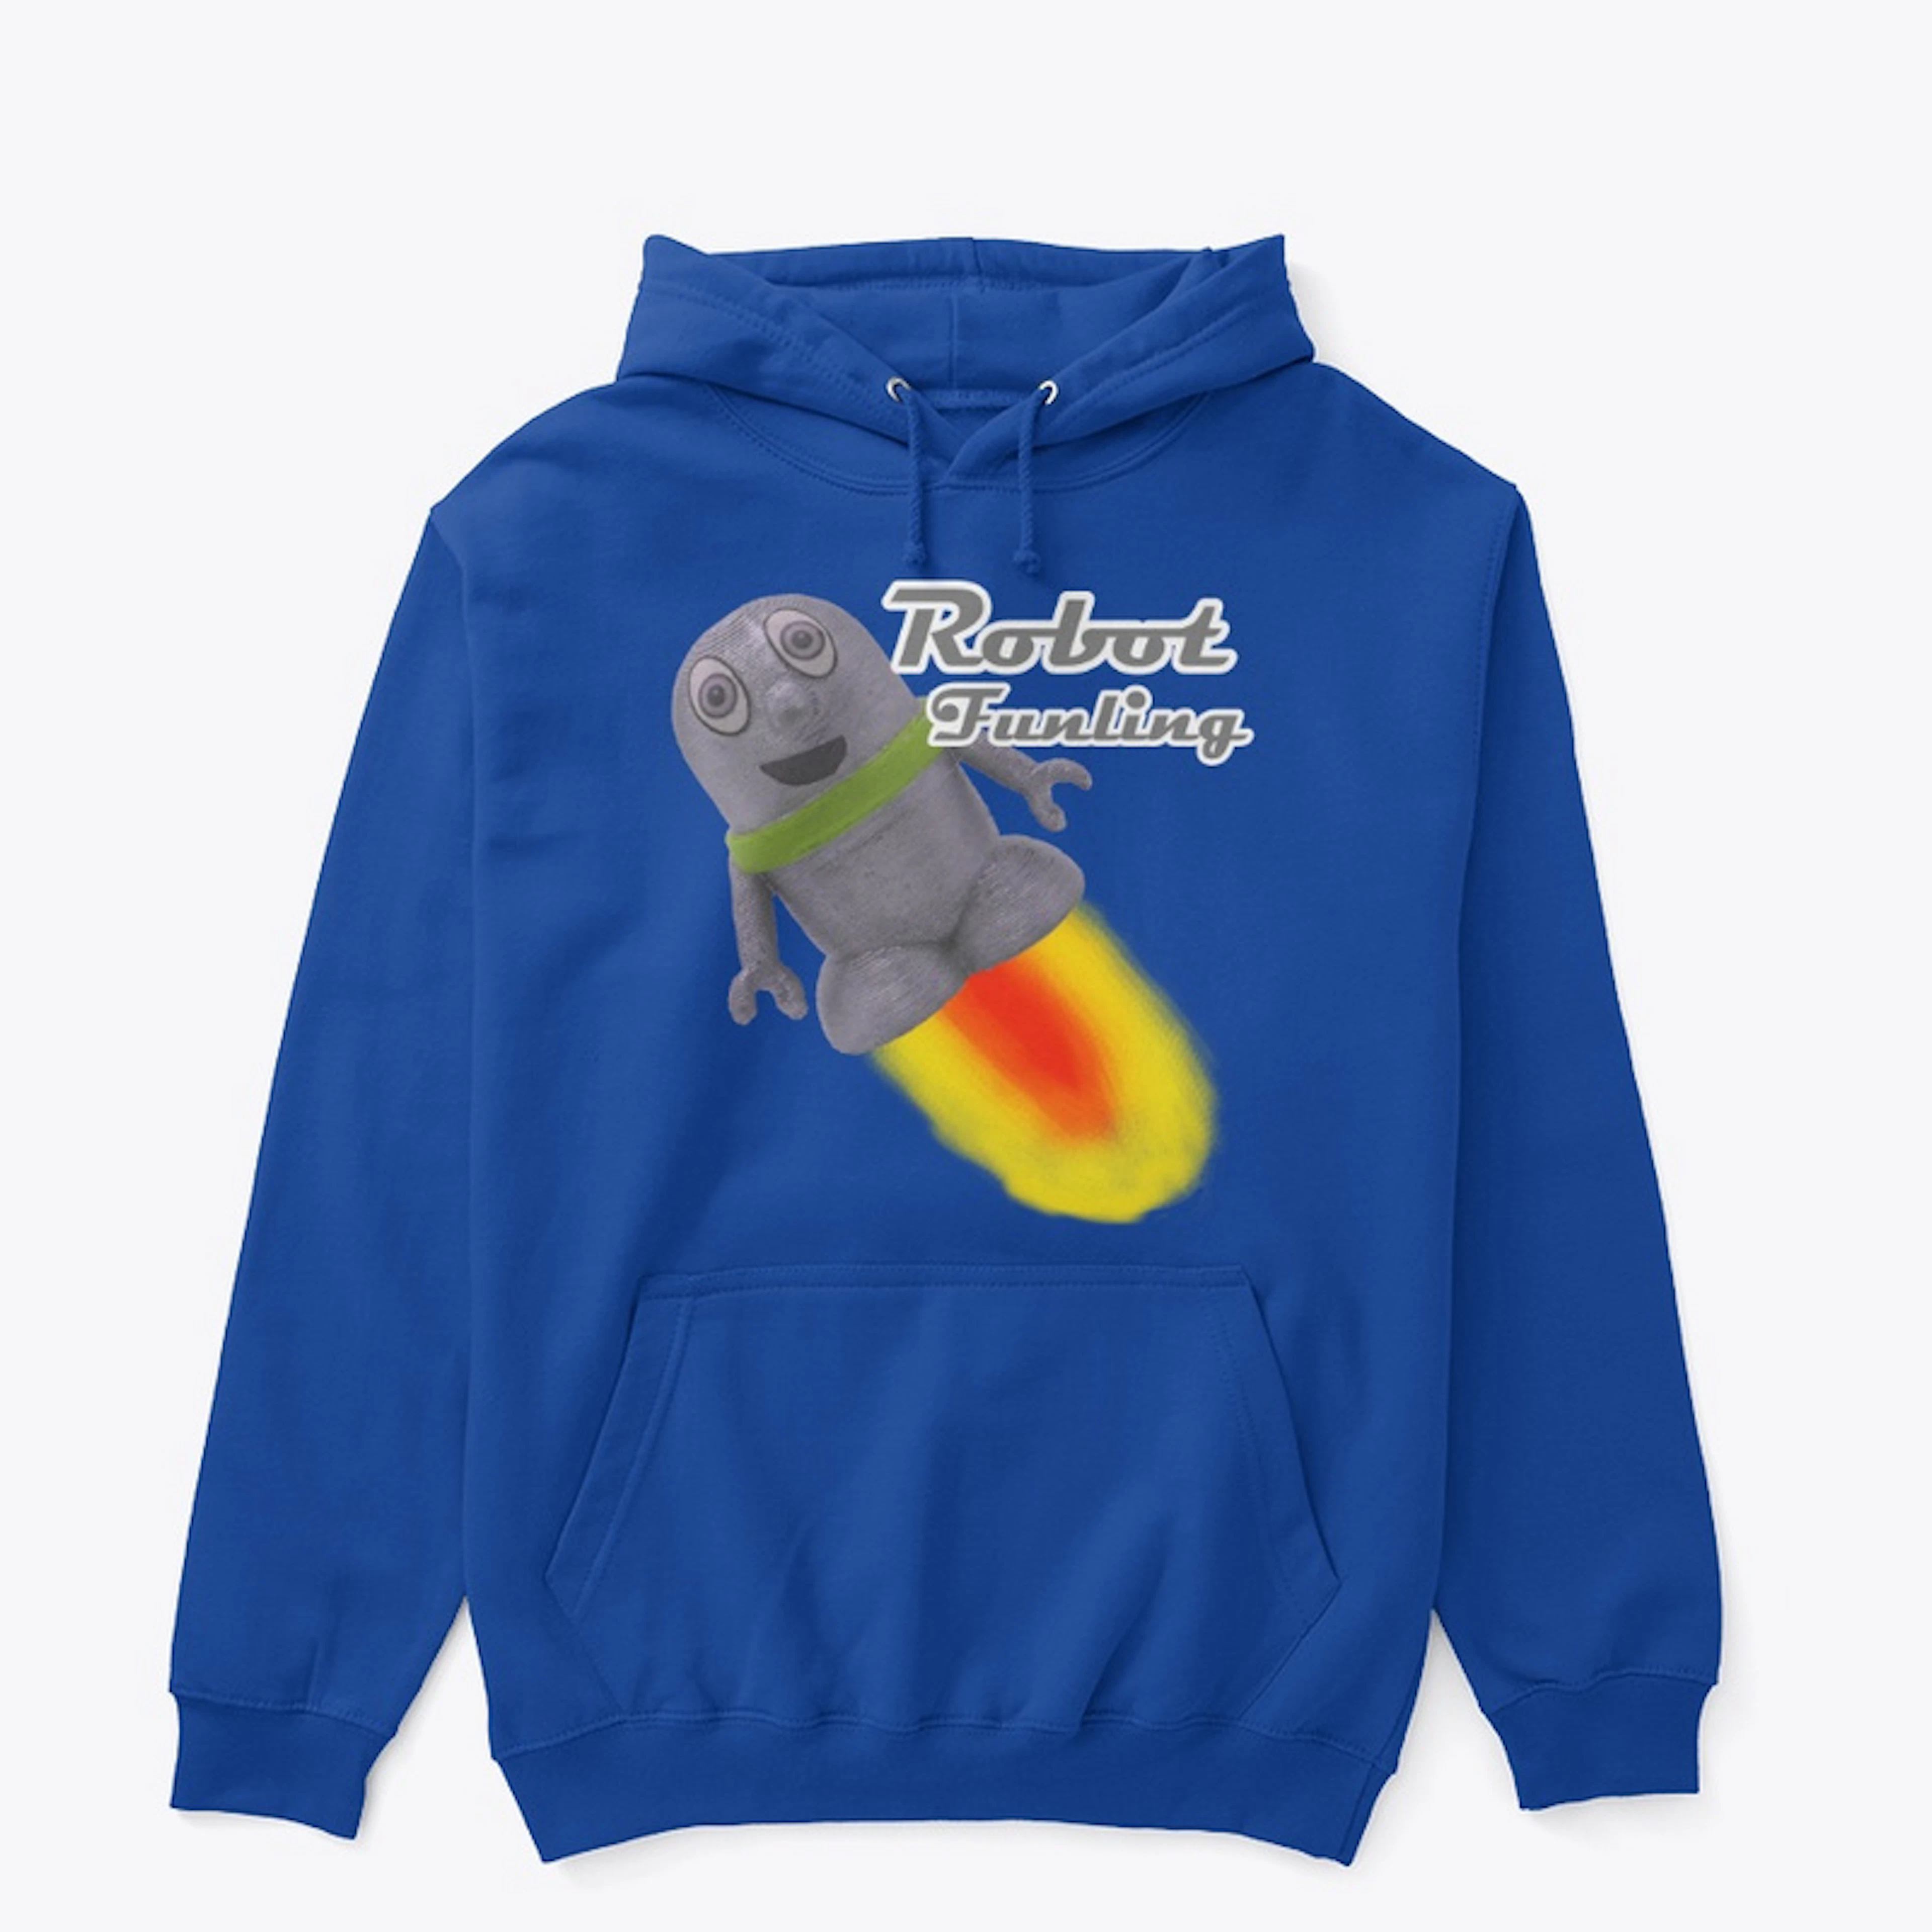 Classic Hoodie with Robot Funling